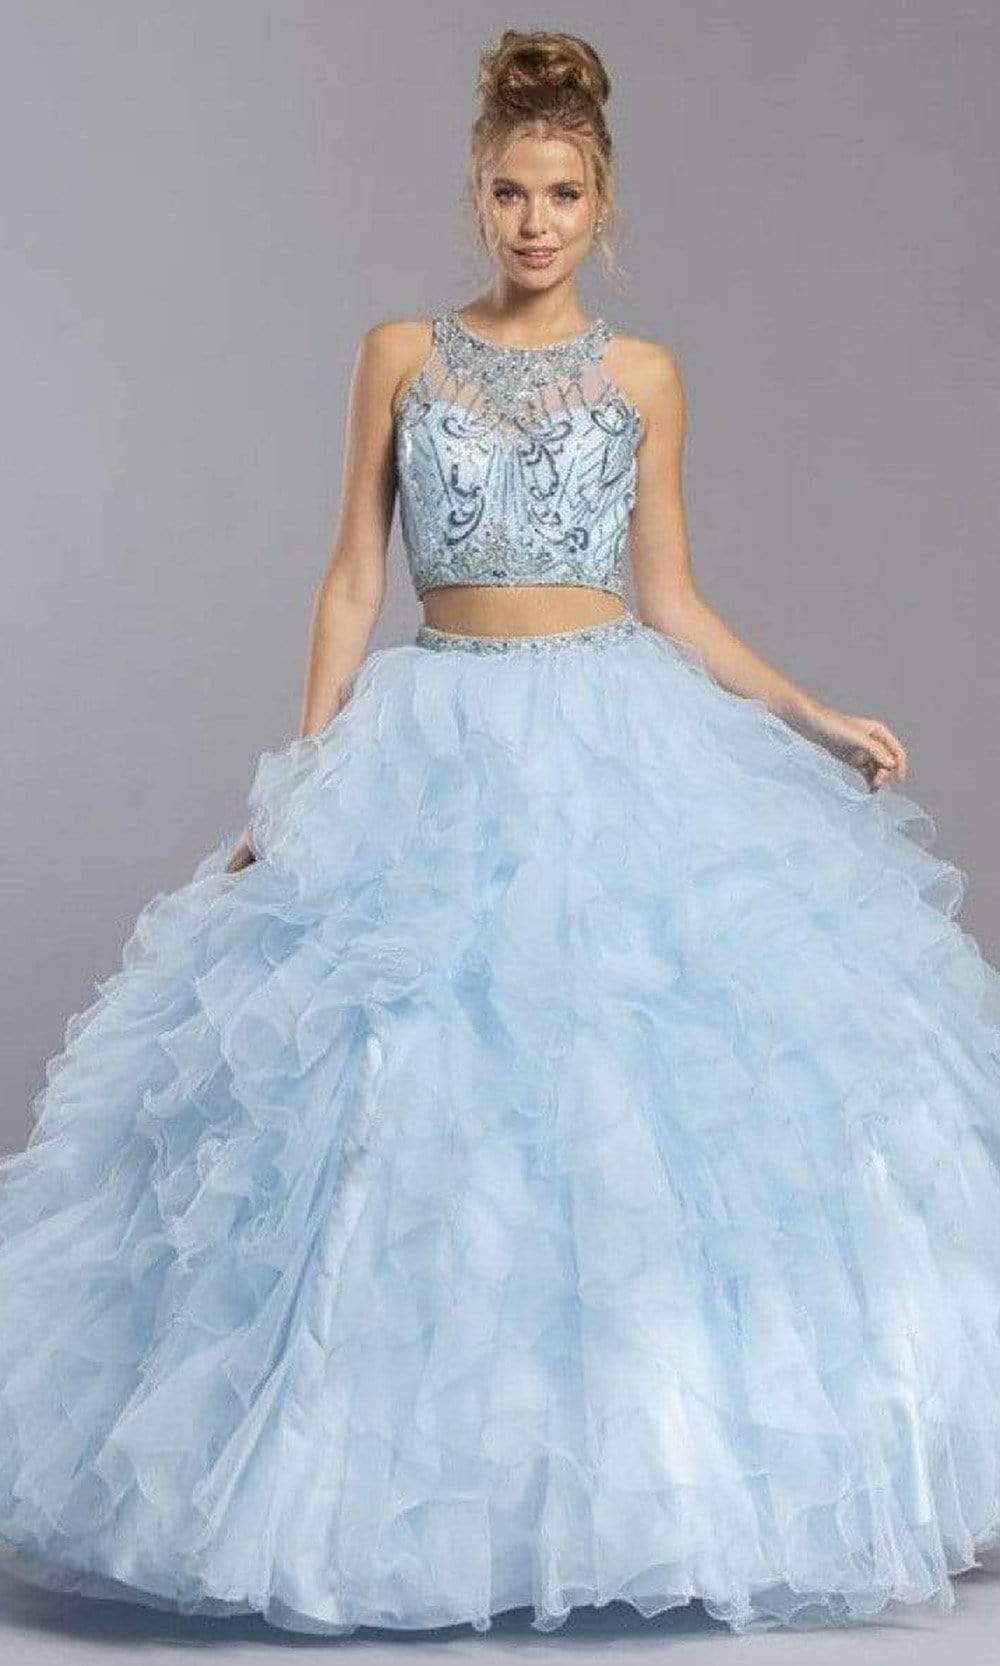 Aspeed Design - L2281 Illusion Jewel Two Piece Ball Gown
